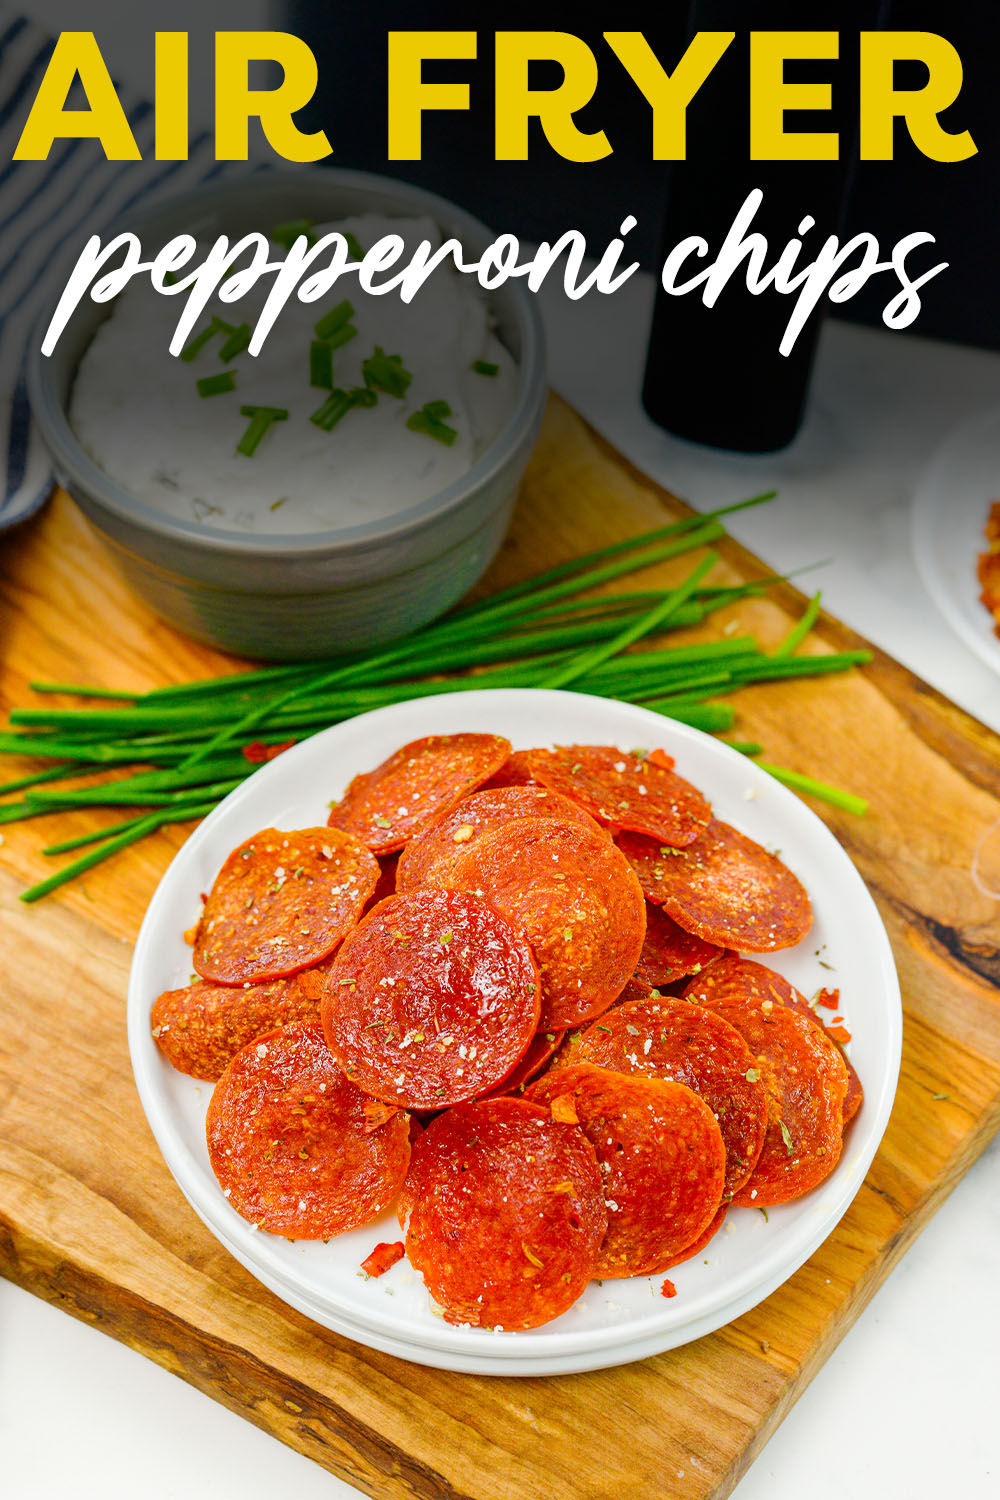 Pepperoni chips on a small white plate in front of an air fryer.